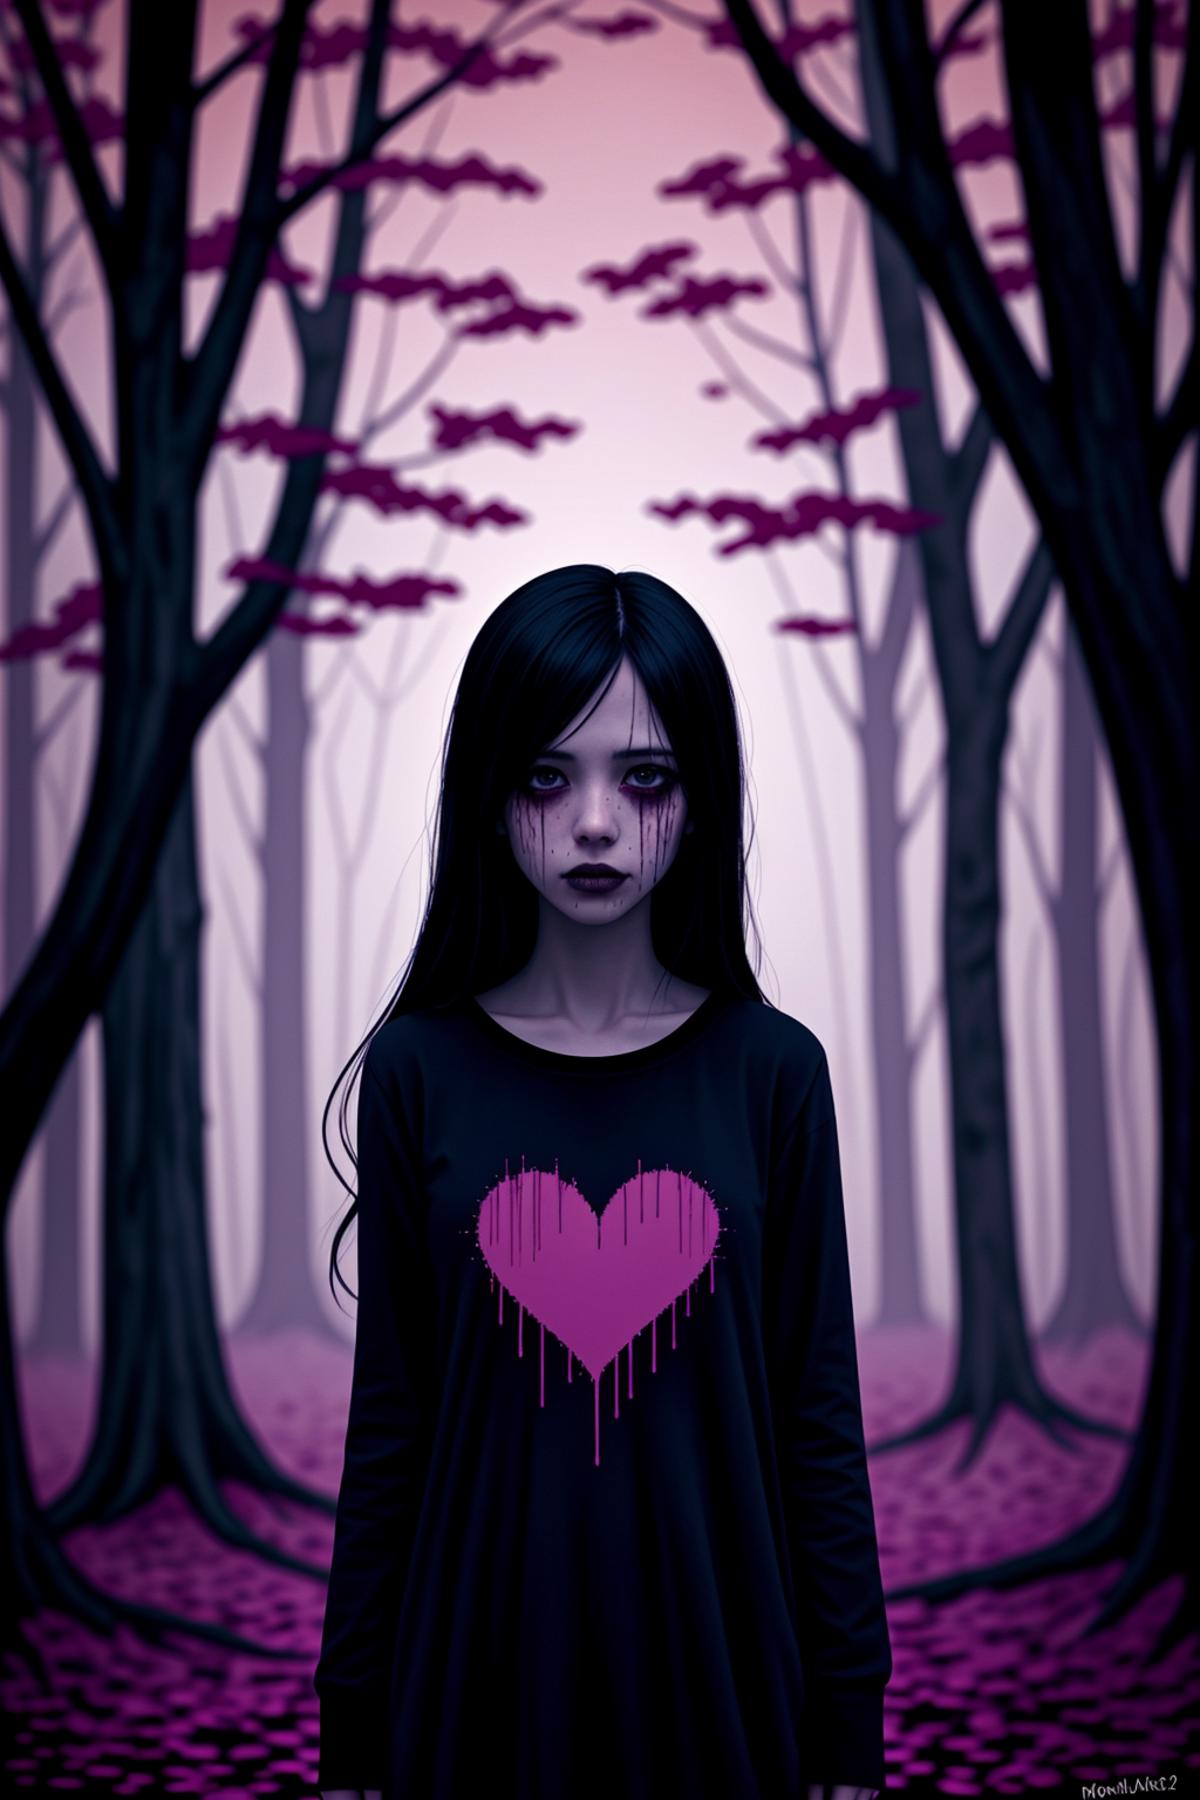 A dark, gothic scene with a girl wearing a black shirt with a heart on it.